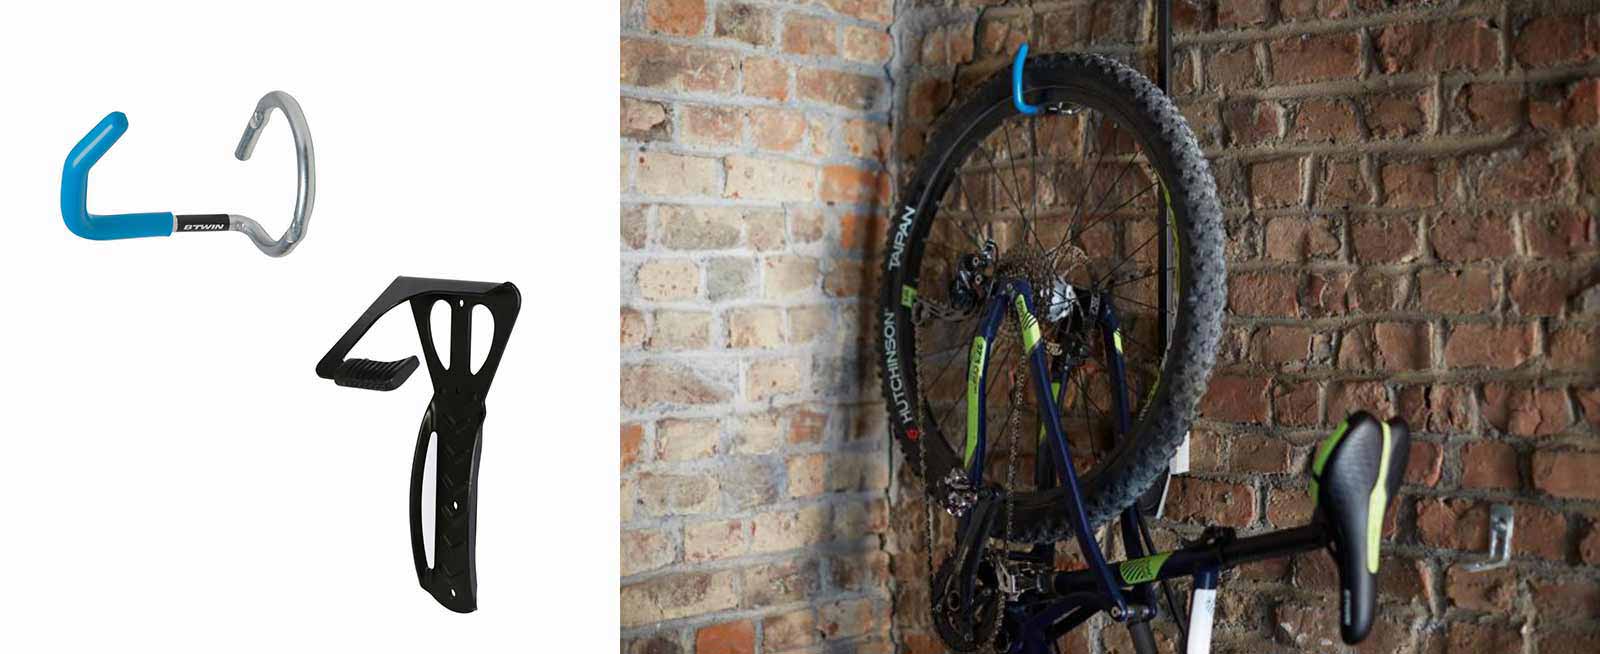 5 Bicycle Storage Solutions